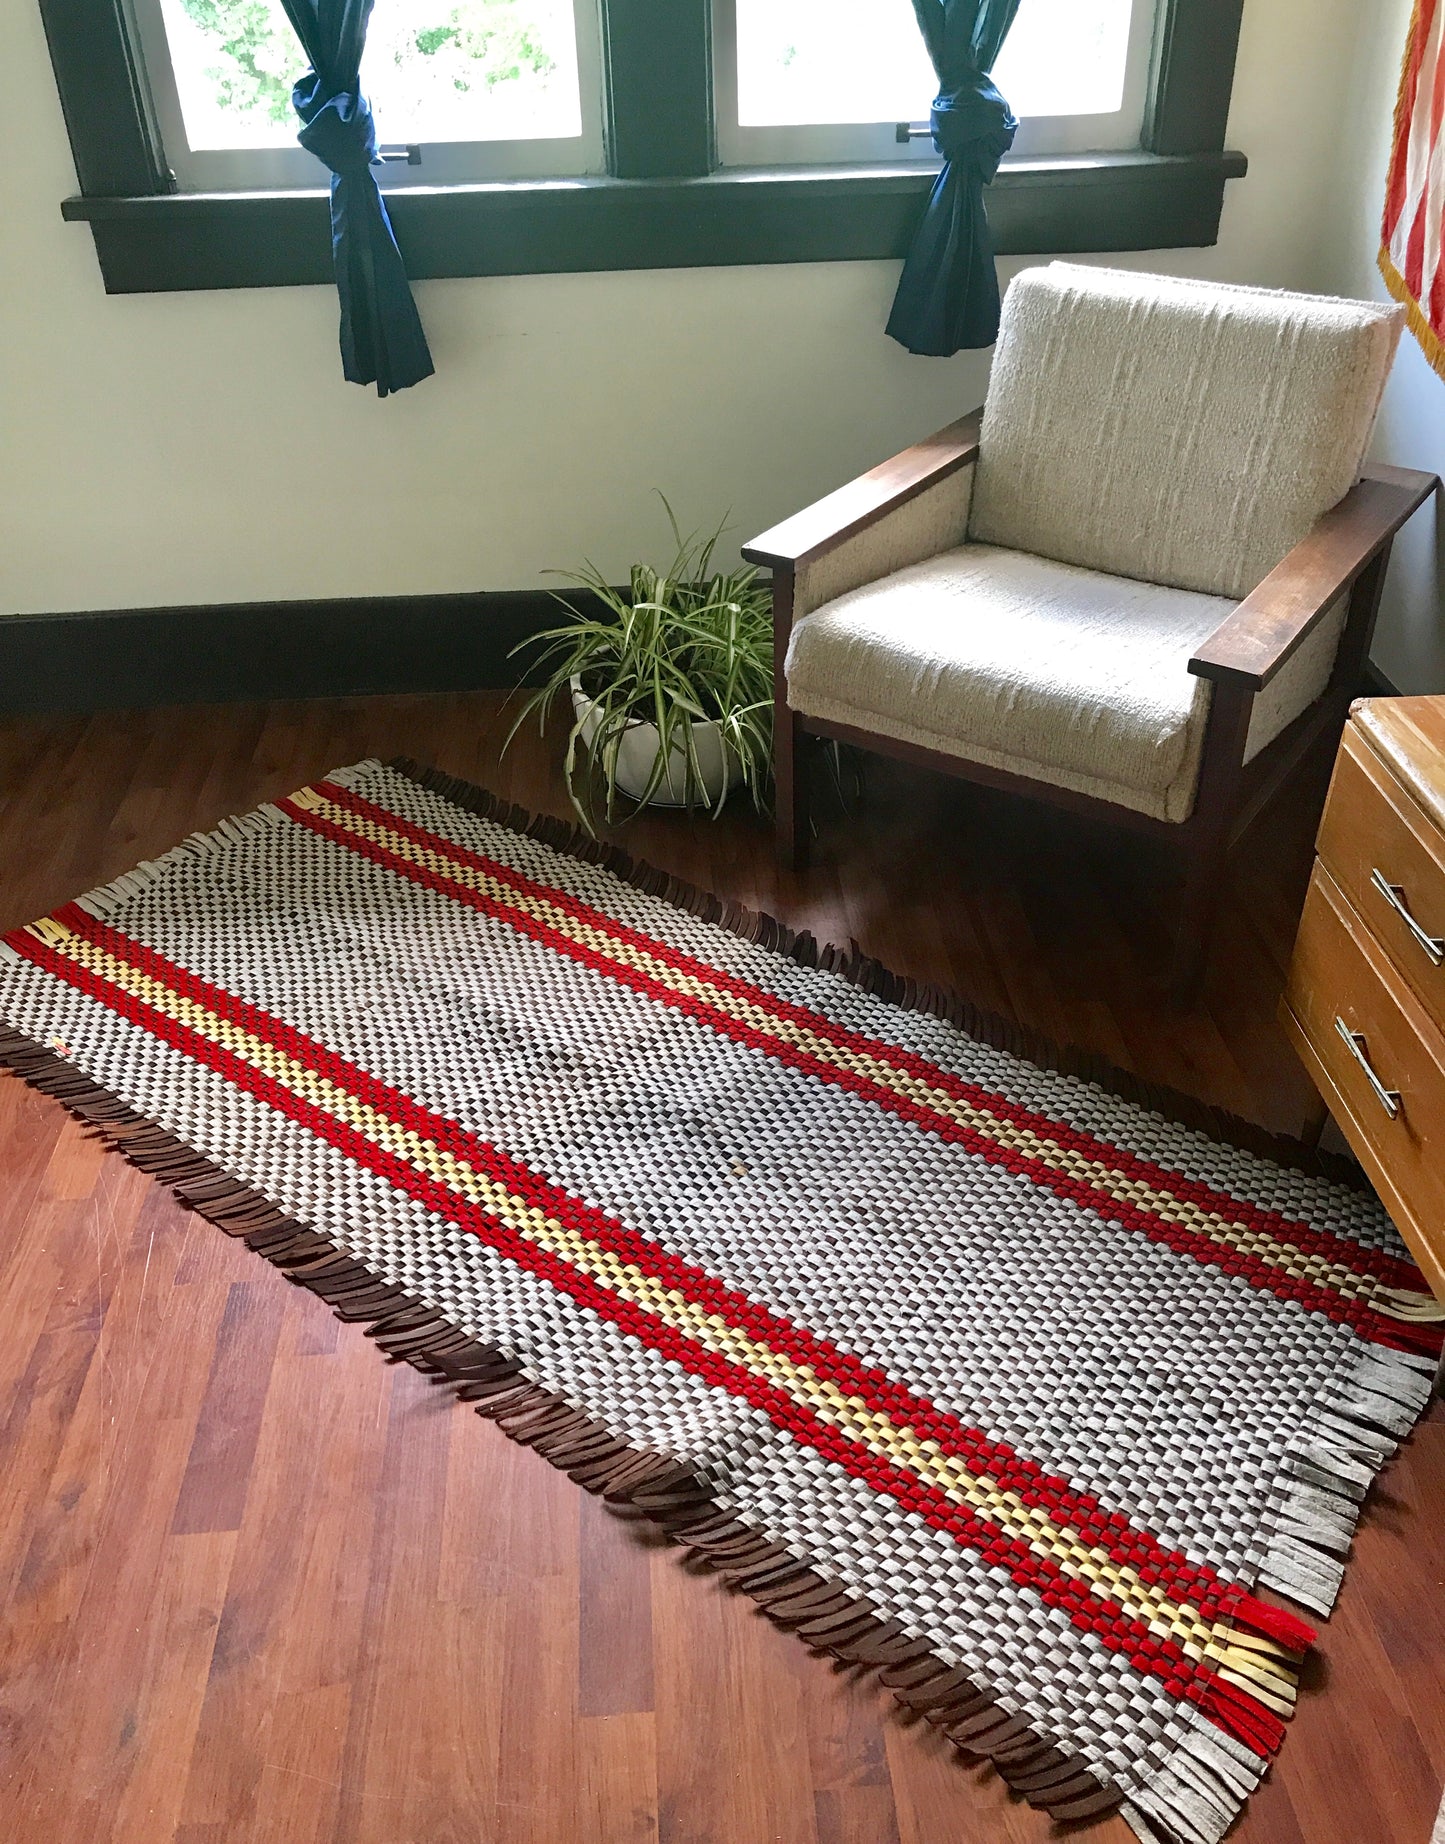 1930s Woven Brown, Cream and Yellow Felt Rug 75"x34"